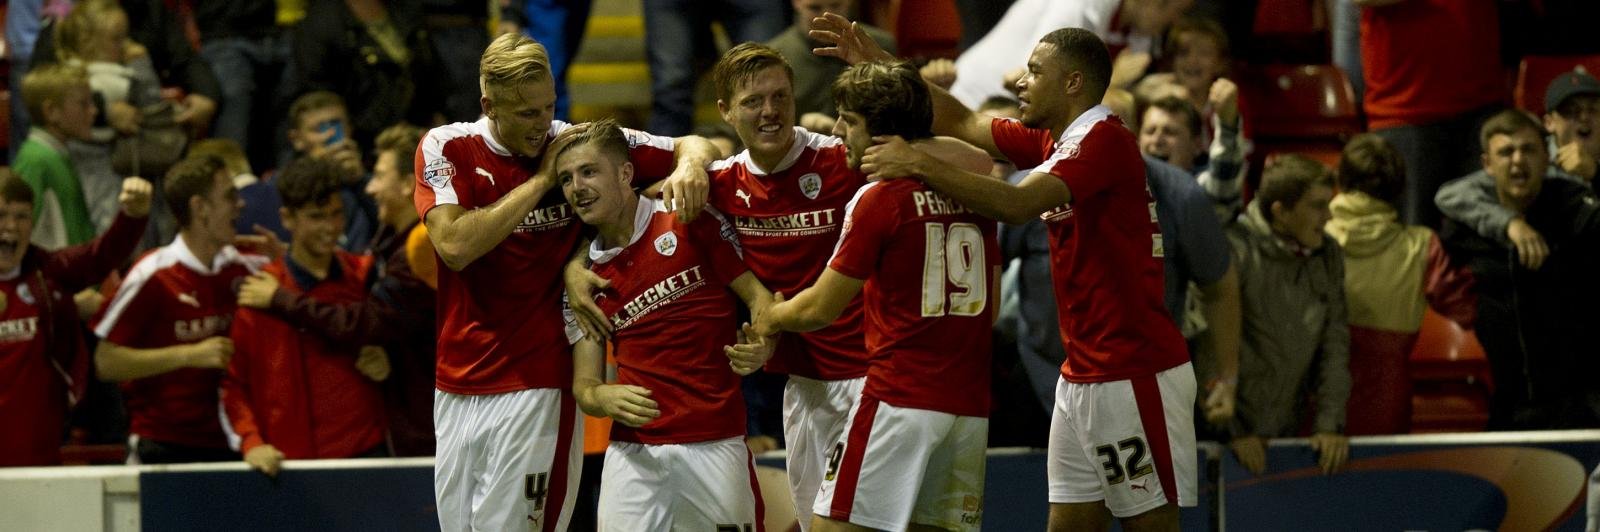 Barnsley vs Walsall: League One Play-Off Preview & Prediction